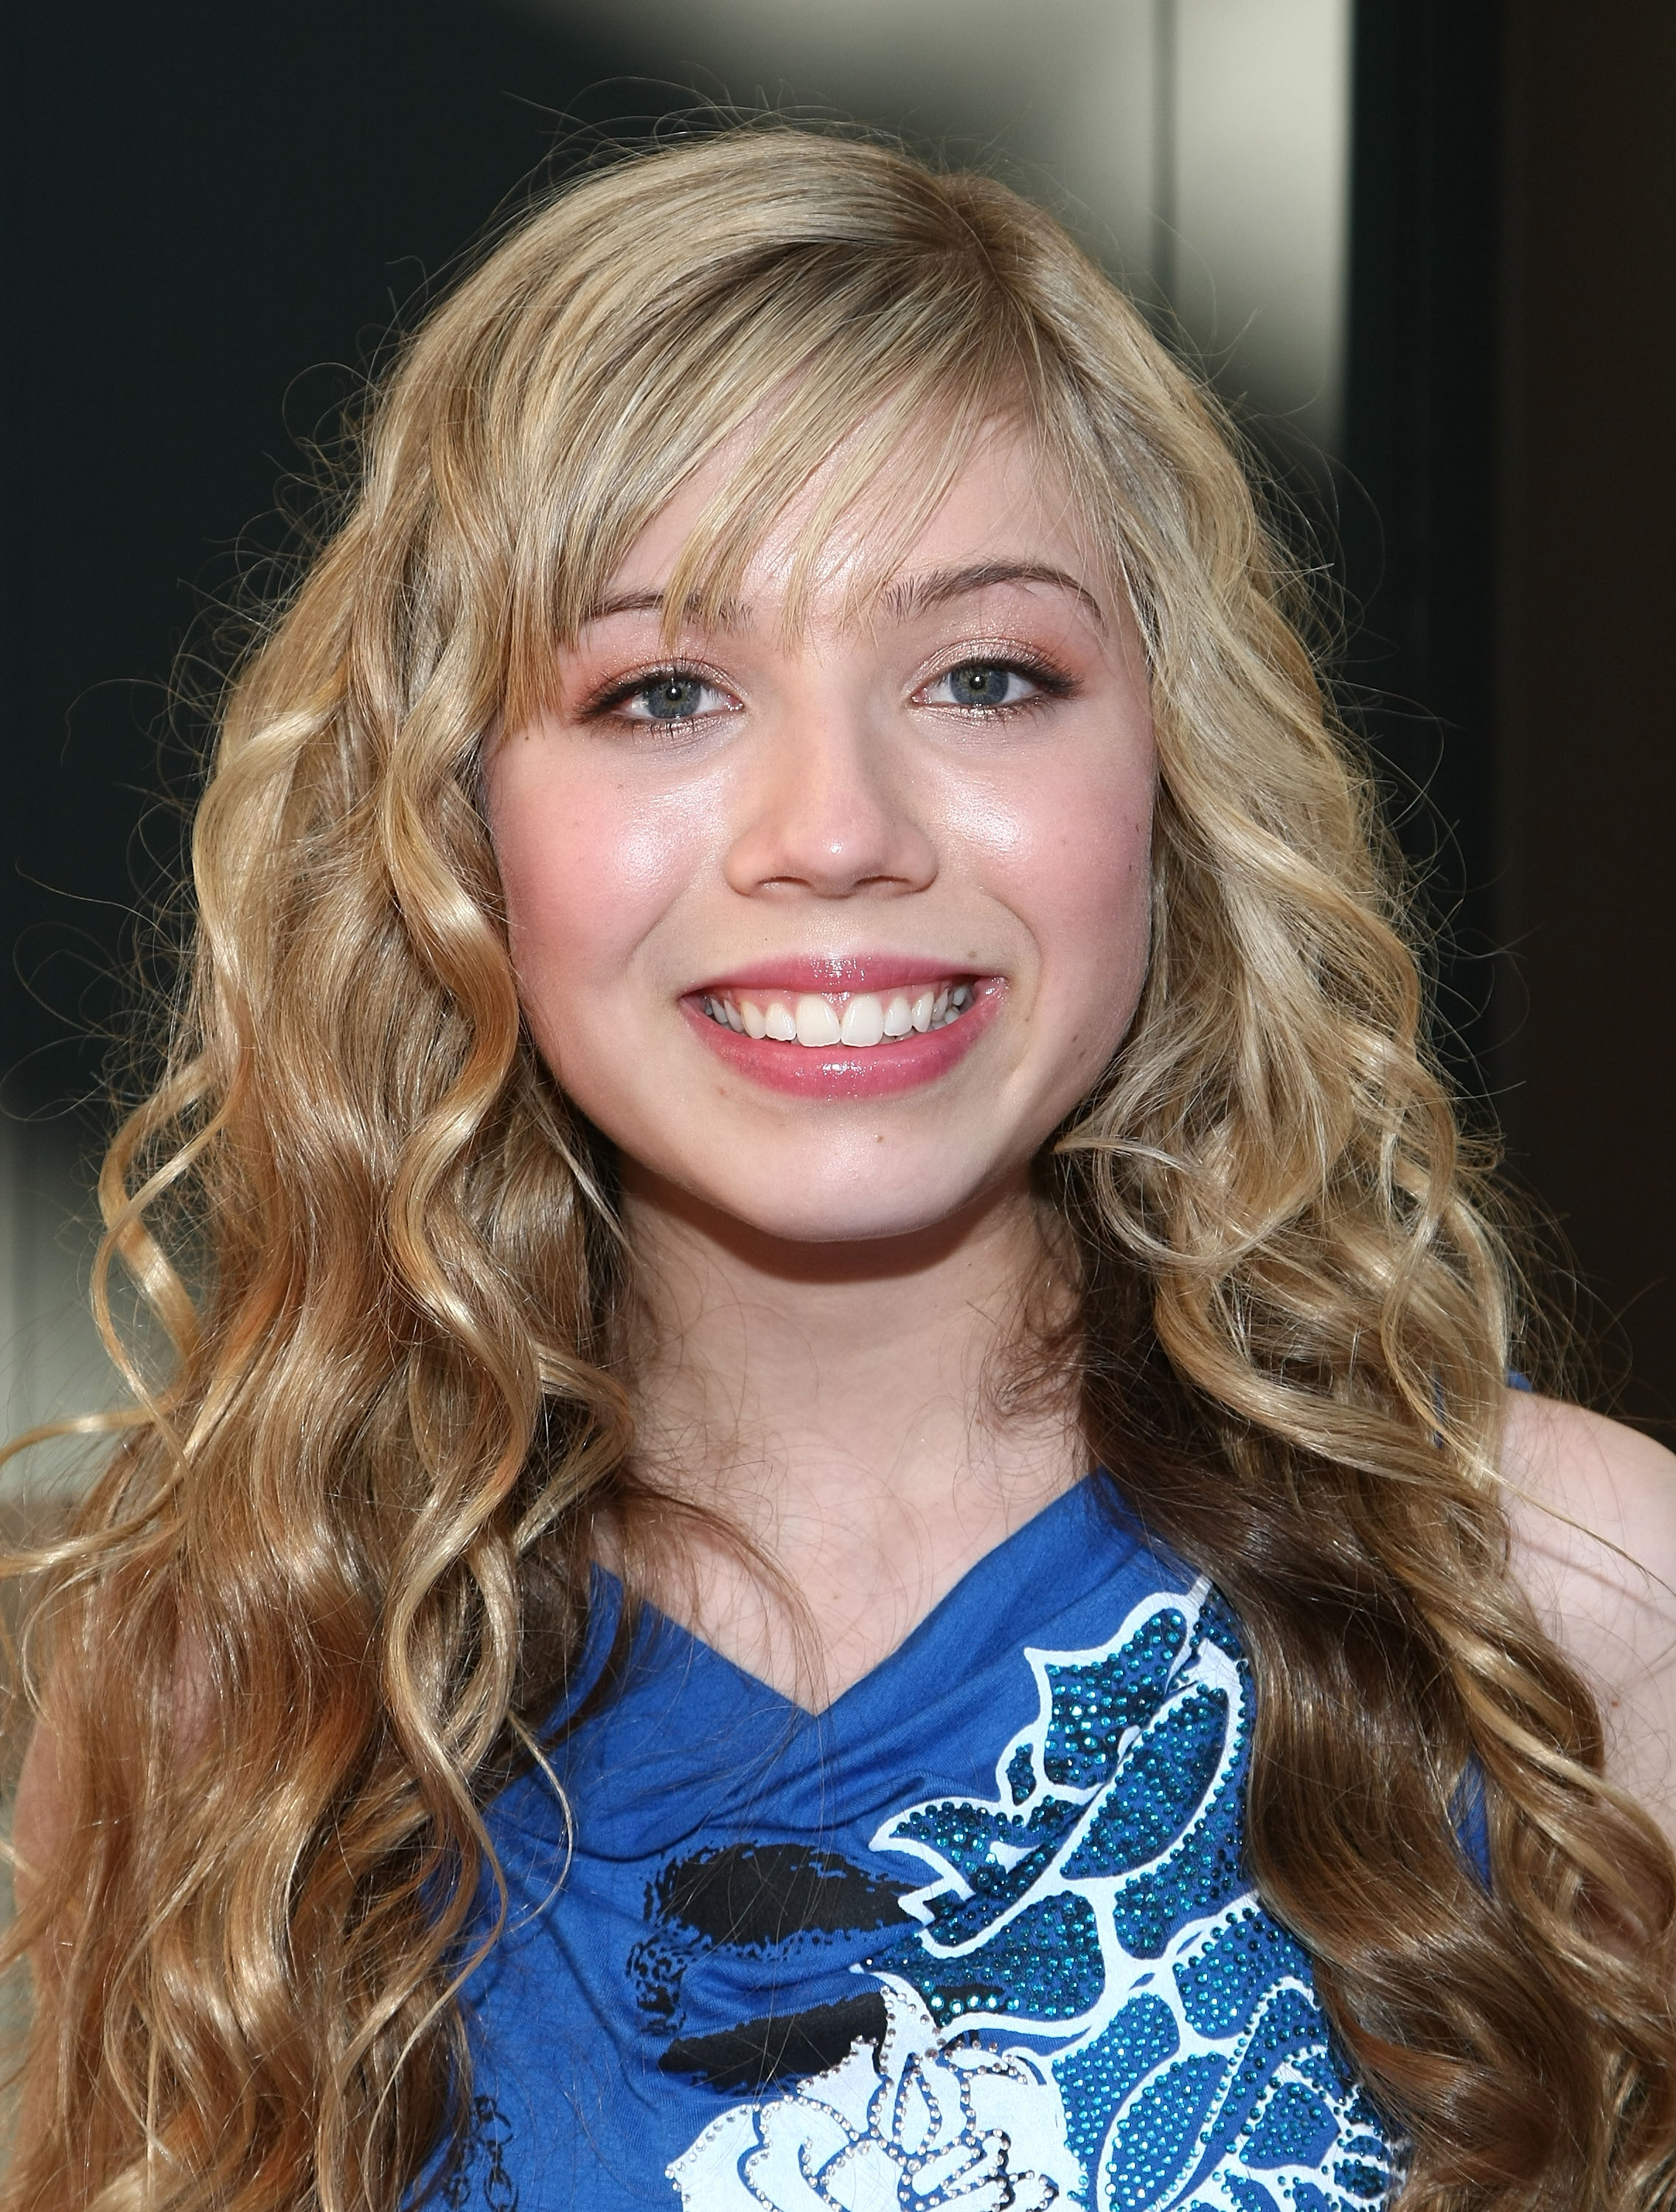 Jennette McCurdy attends the premiere of The G-Girls Music Video on June 28, 2008 | Source: Getty Images